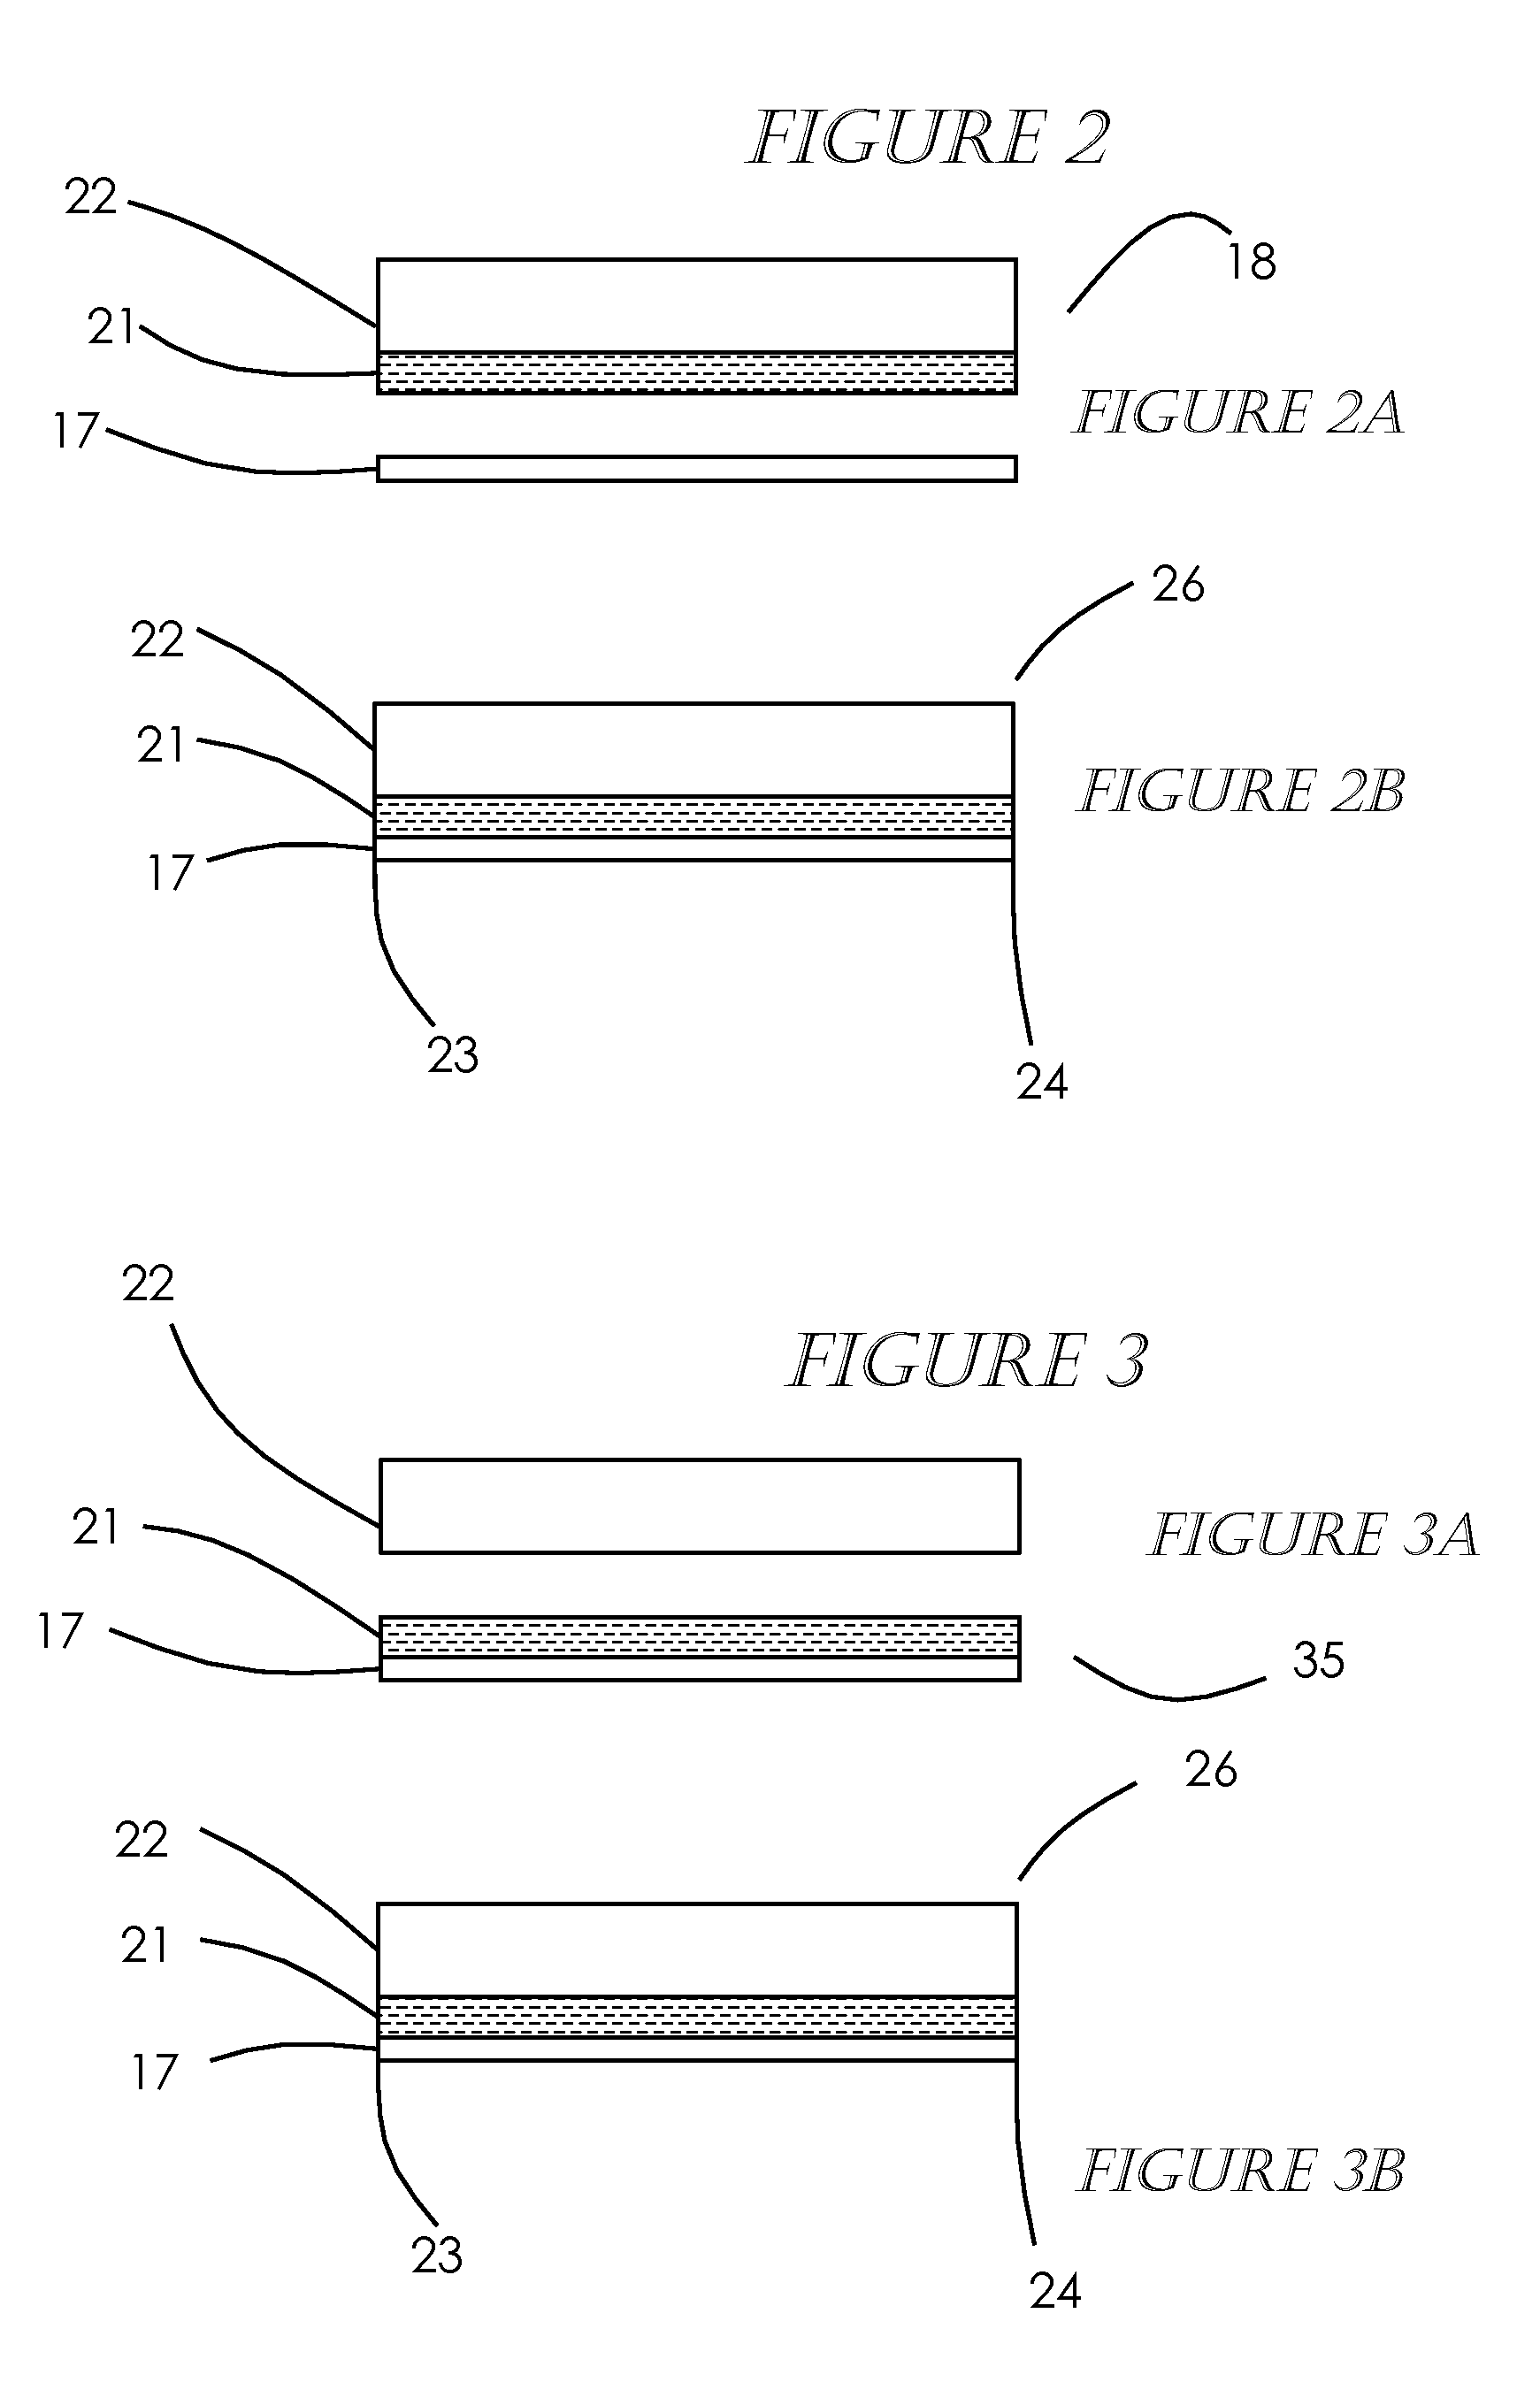 Membrane electrode assembly fabrication